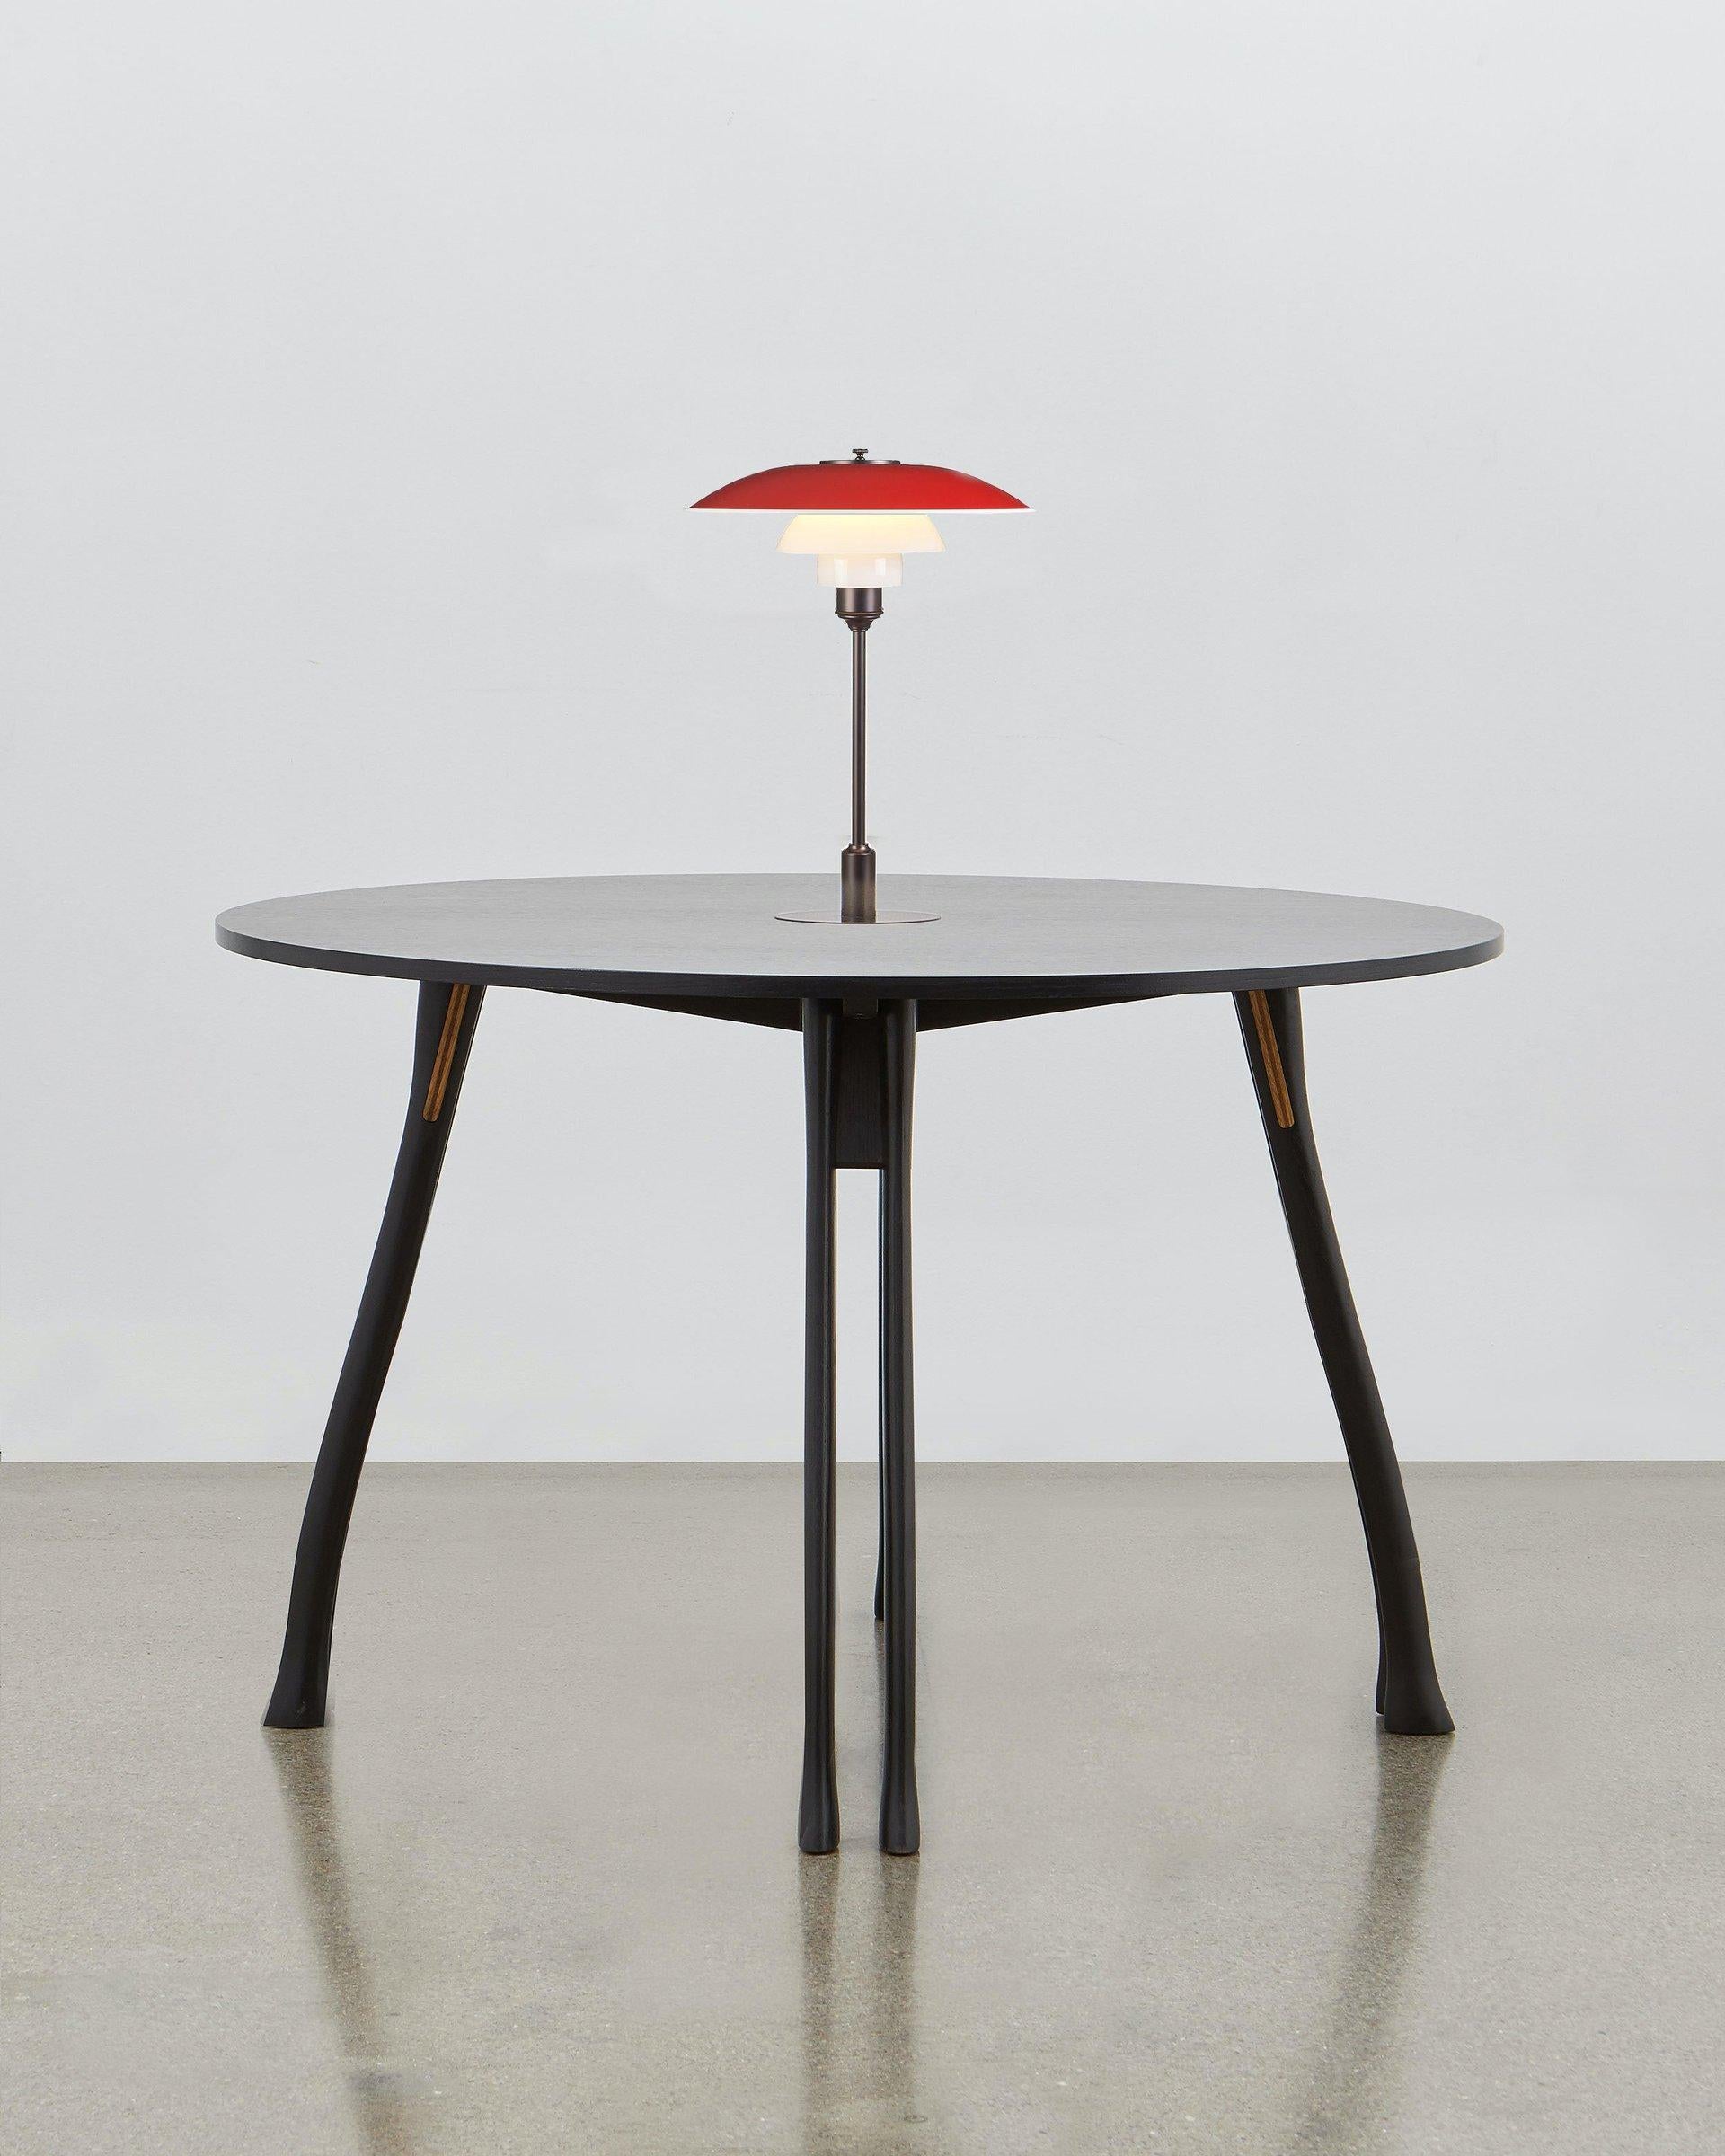 Inspired by the humble axe handle, Poul Henningsen has utilized this familiar and tactile shape to provide the basis for the legs of the versatile table.

This piece of furniture stays true to the fundamental values that drove its designer: it is